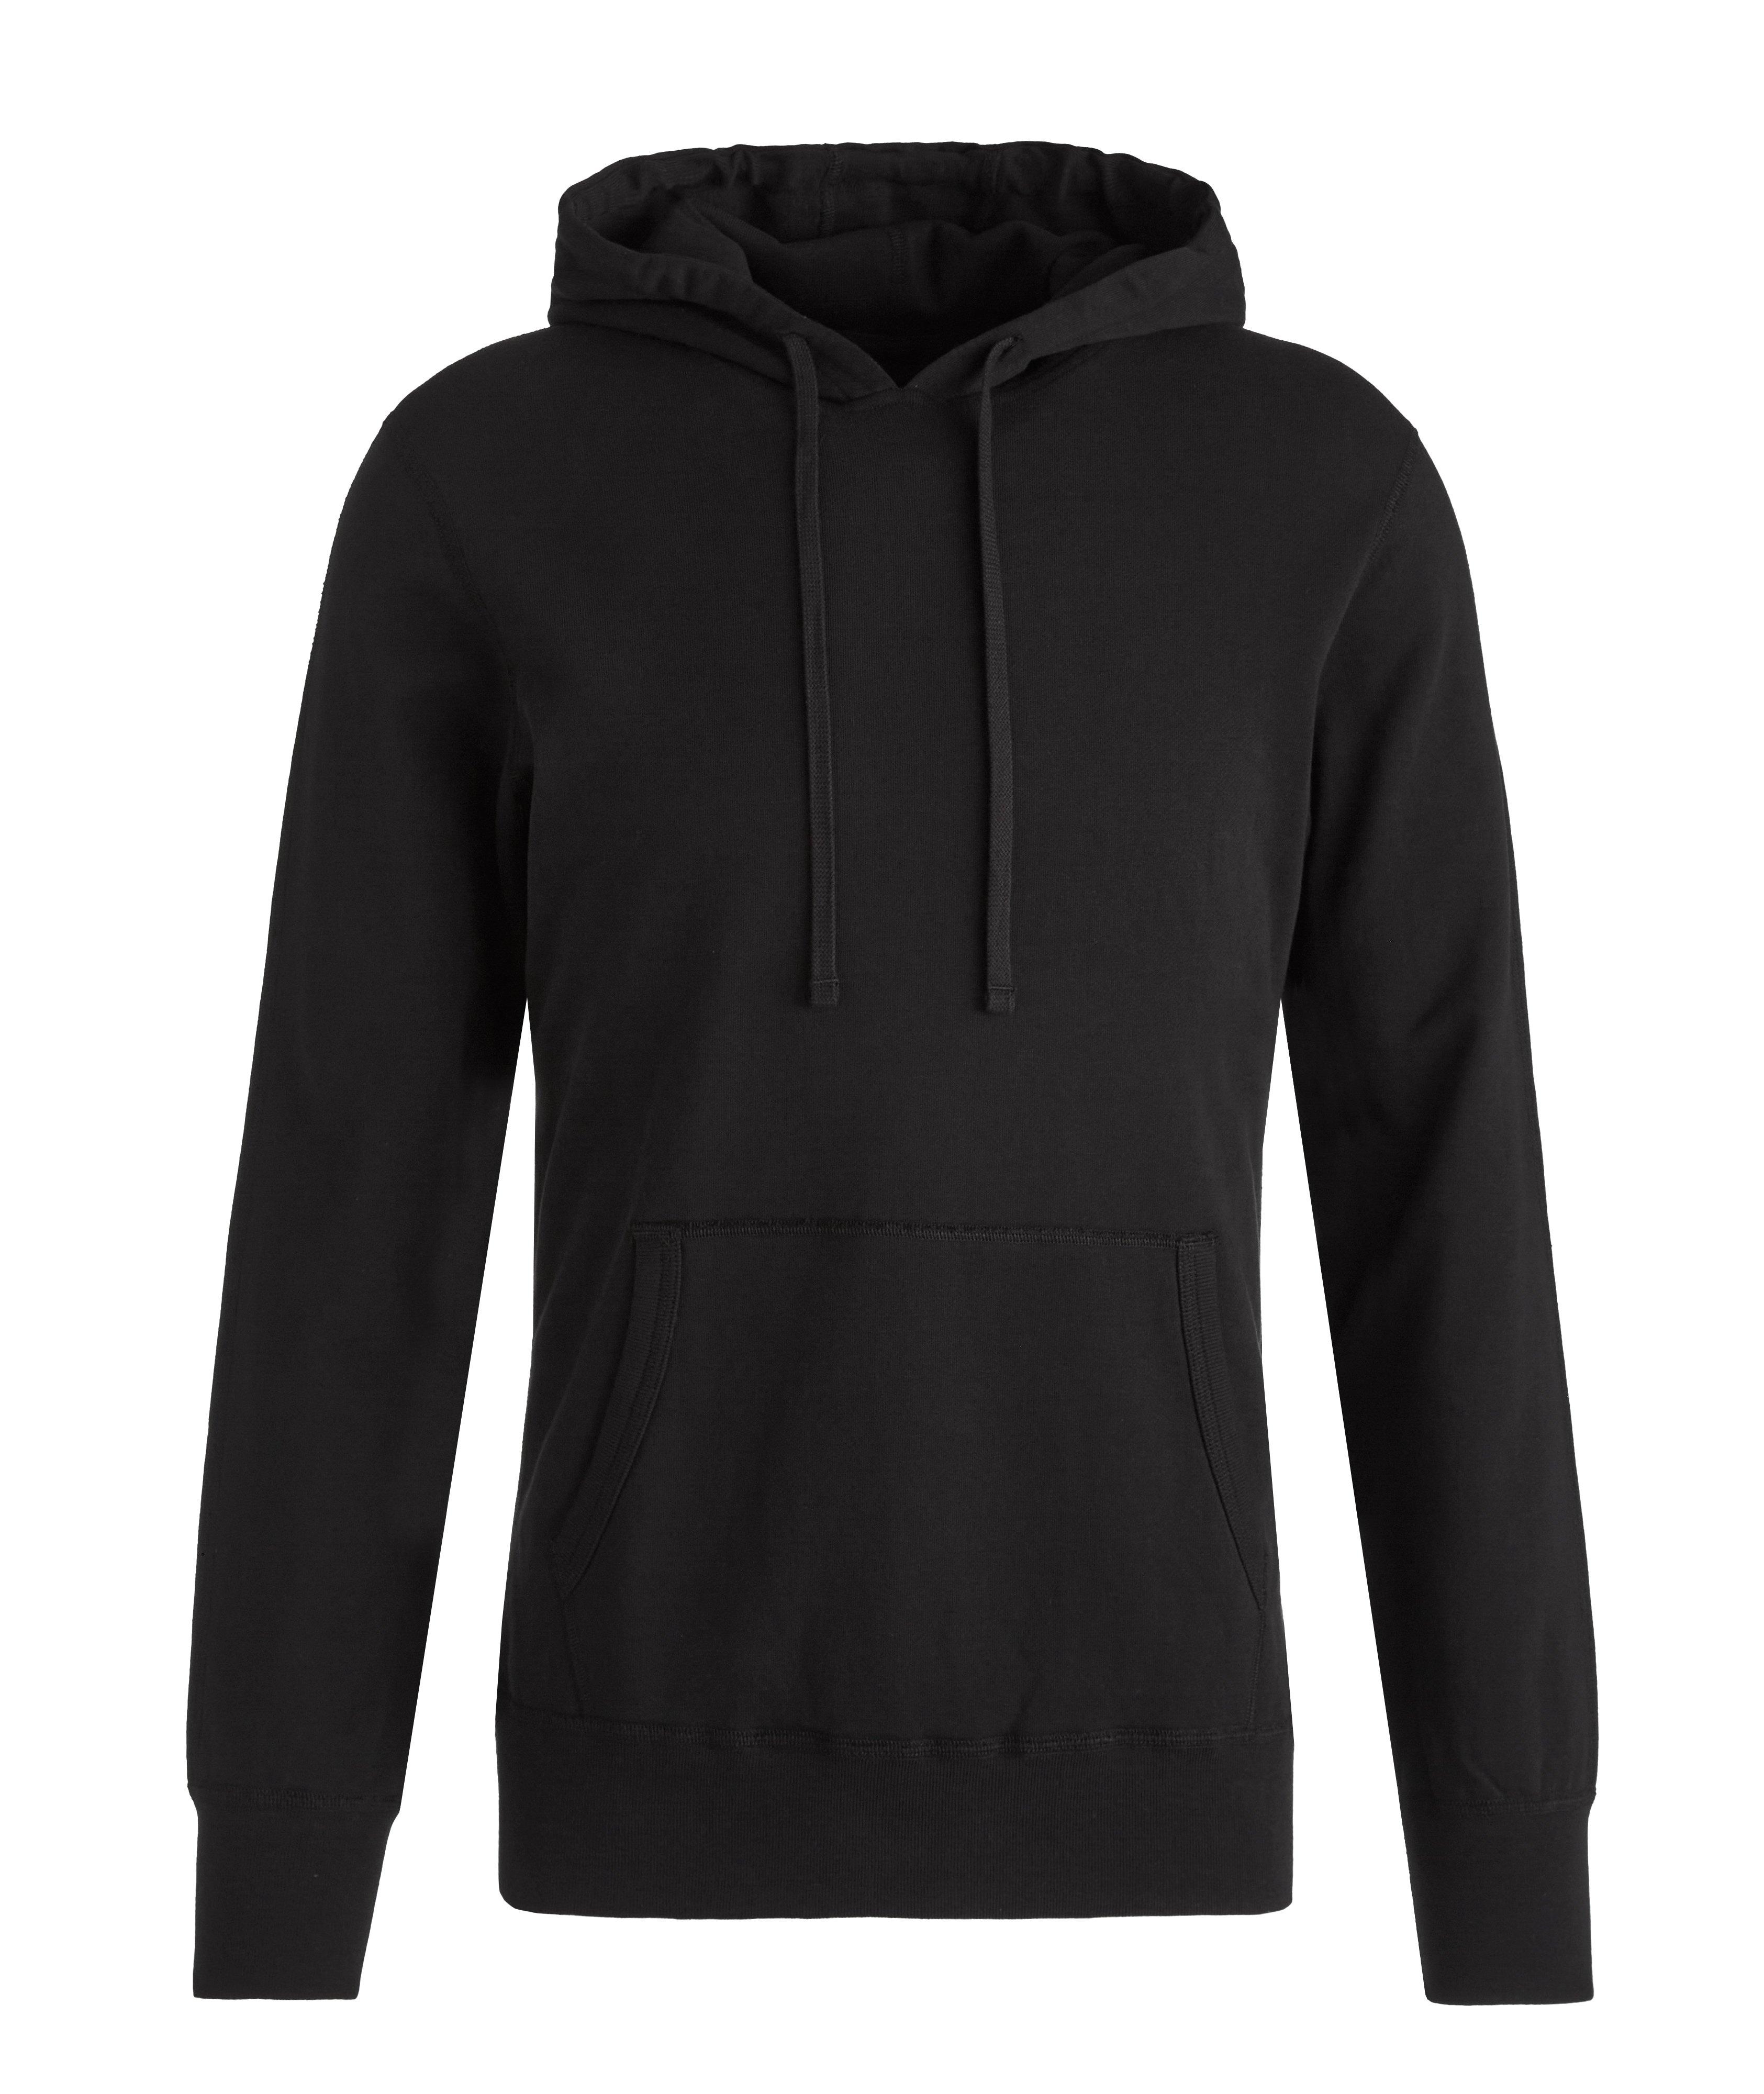 Reigning Champ Cotton Drawstring Hooded Sweater | Sweaters & Knits ...